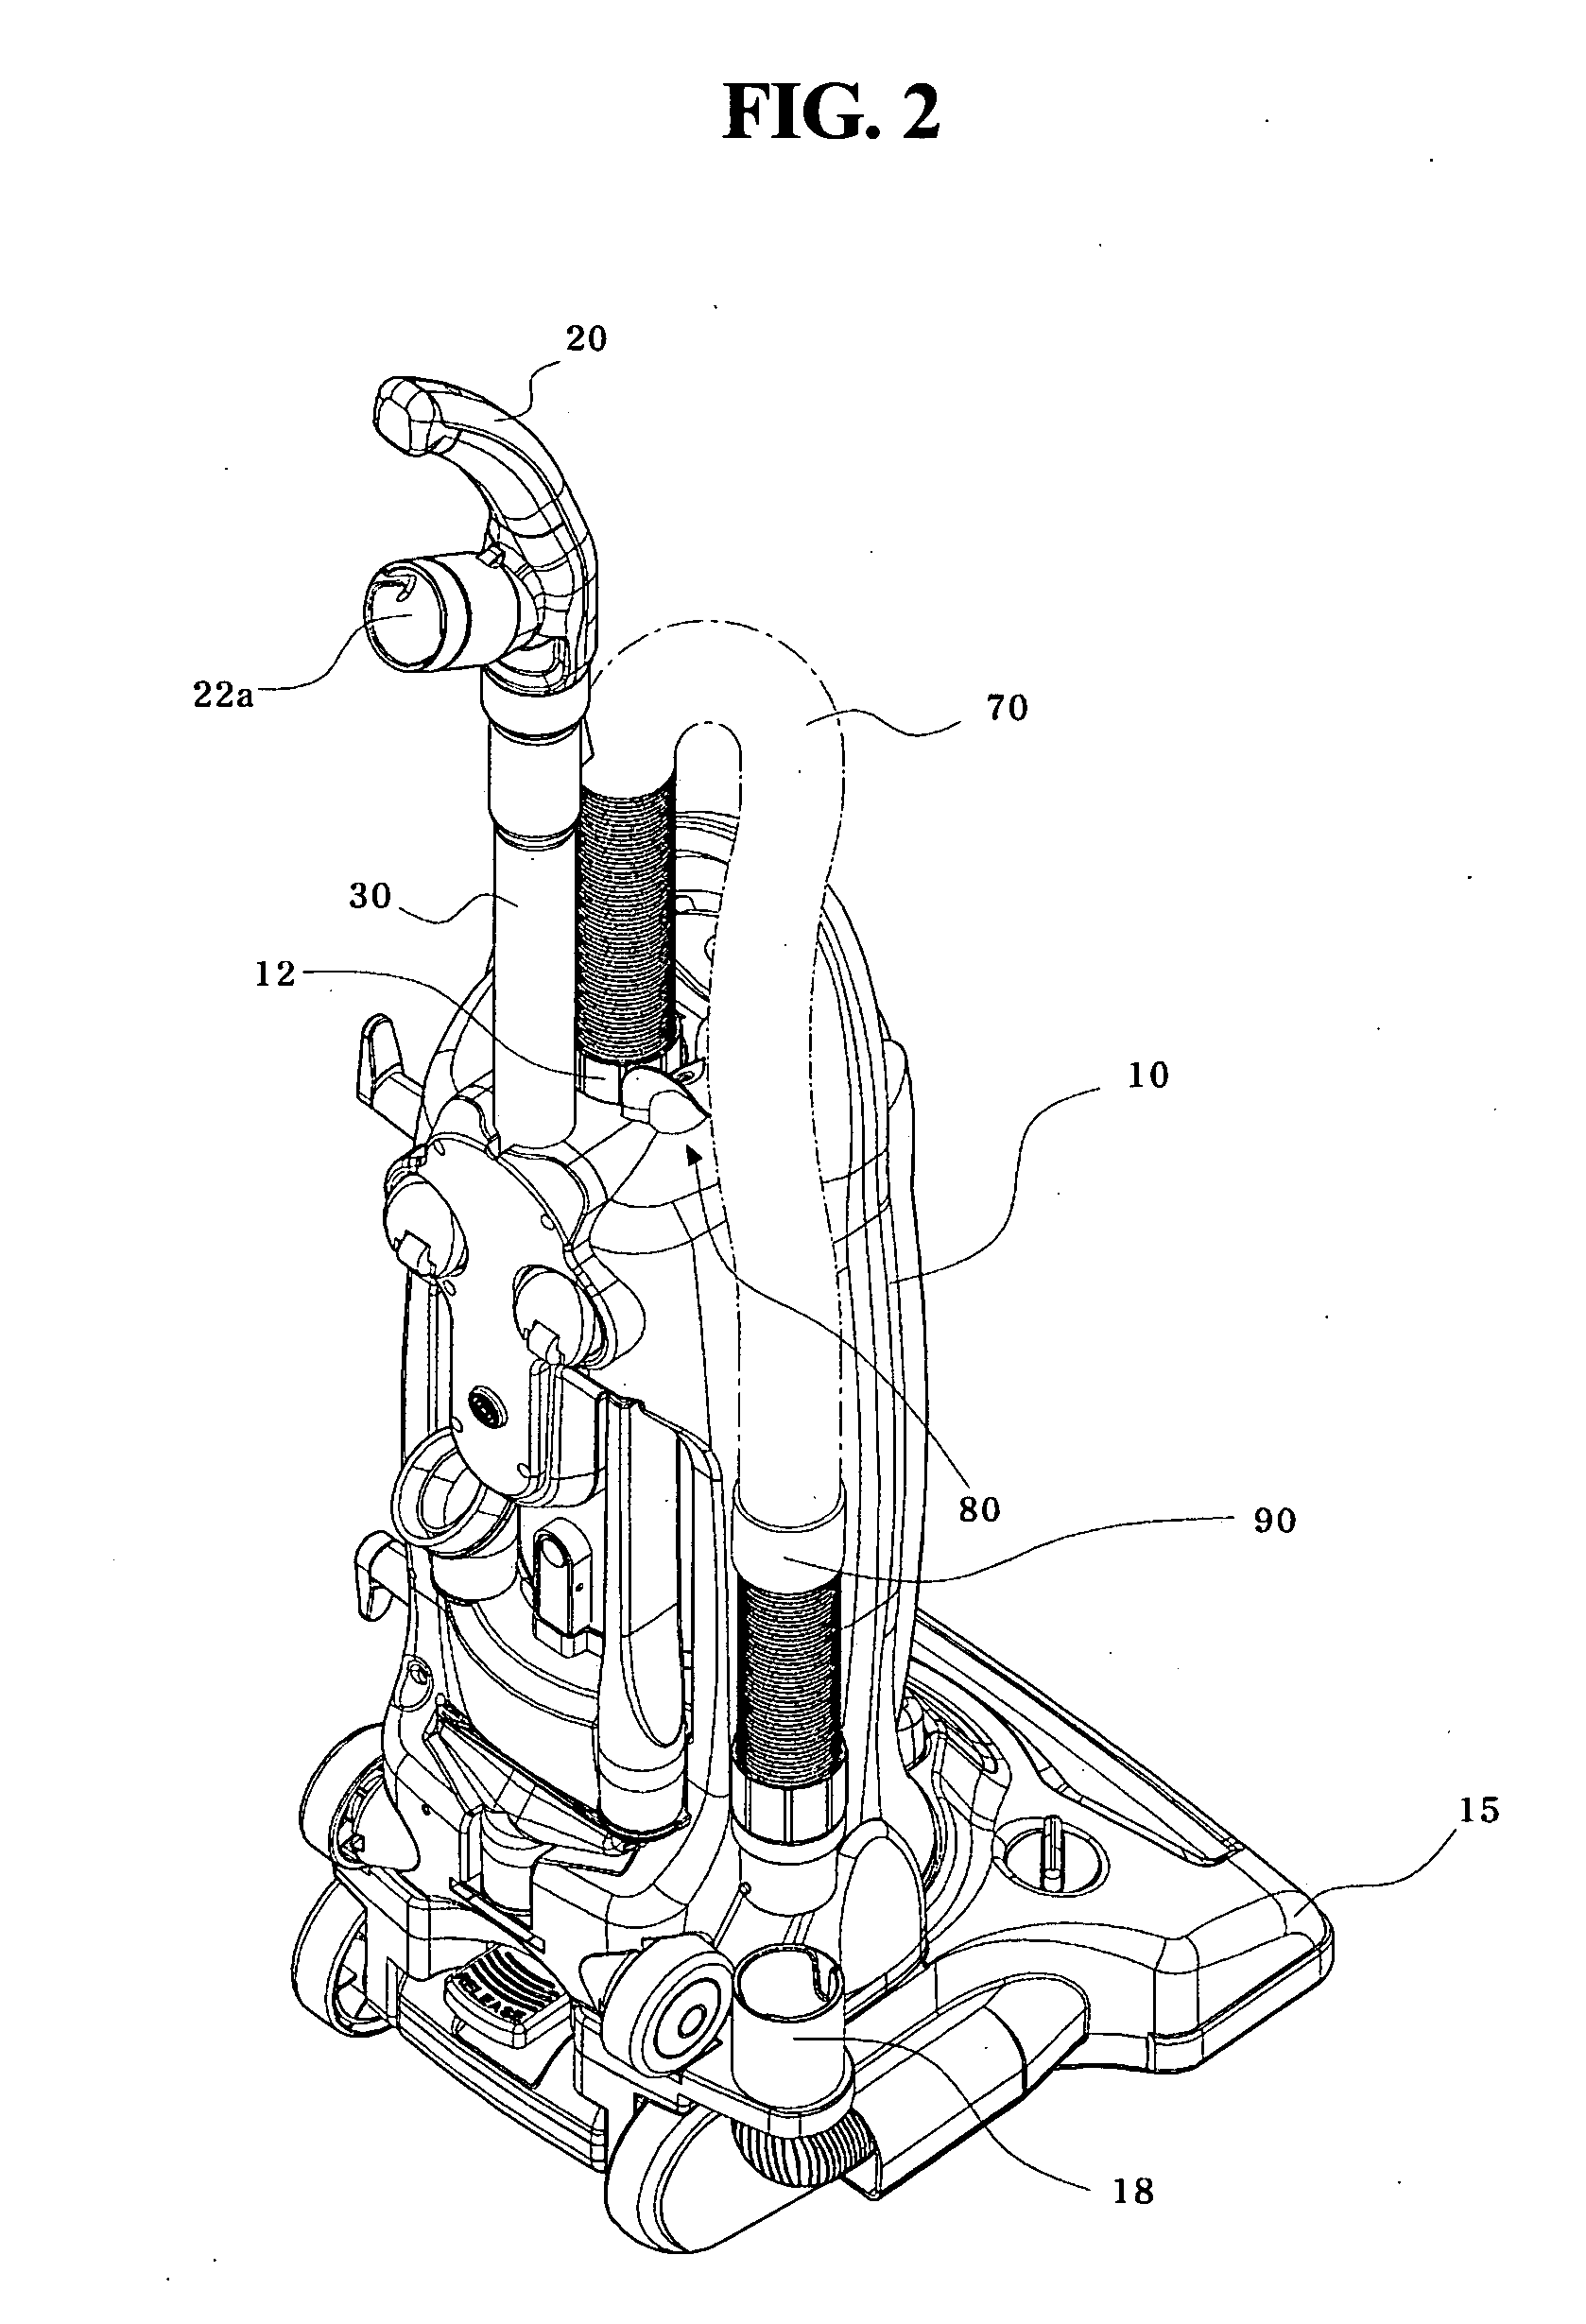 Suction hose supporting structure for upright type vacuum cleaner capable of being converted to canister type